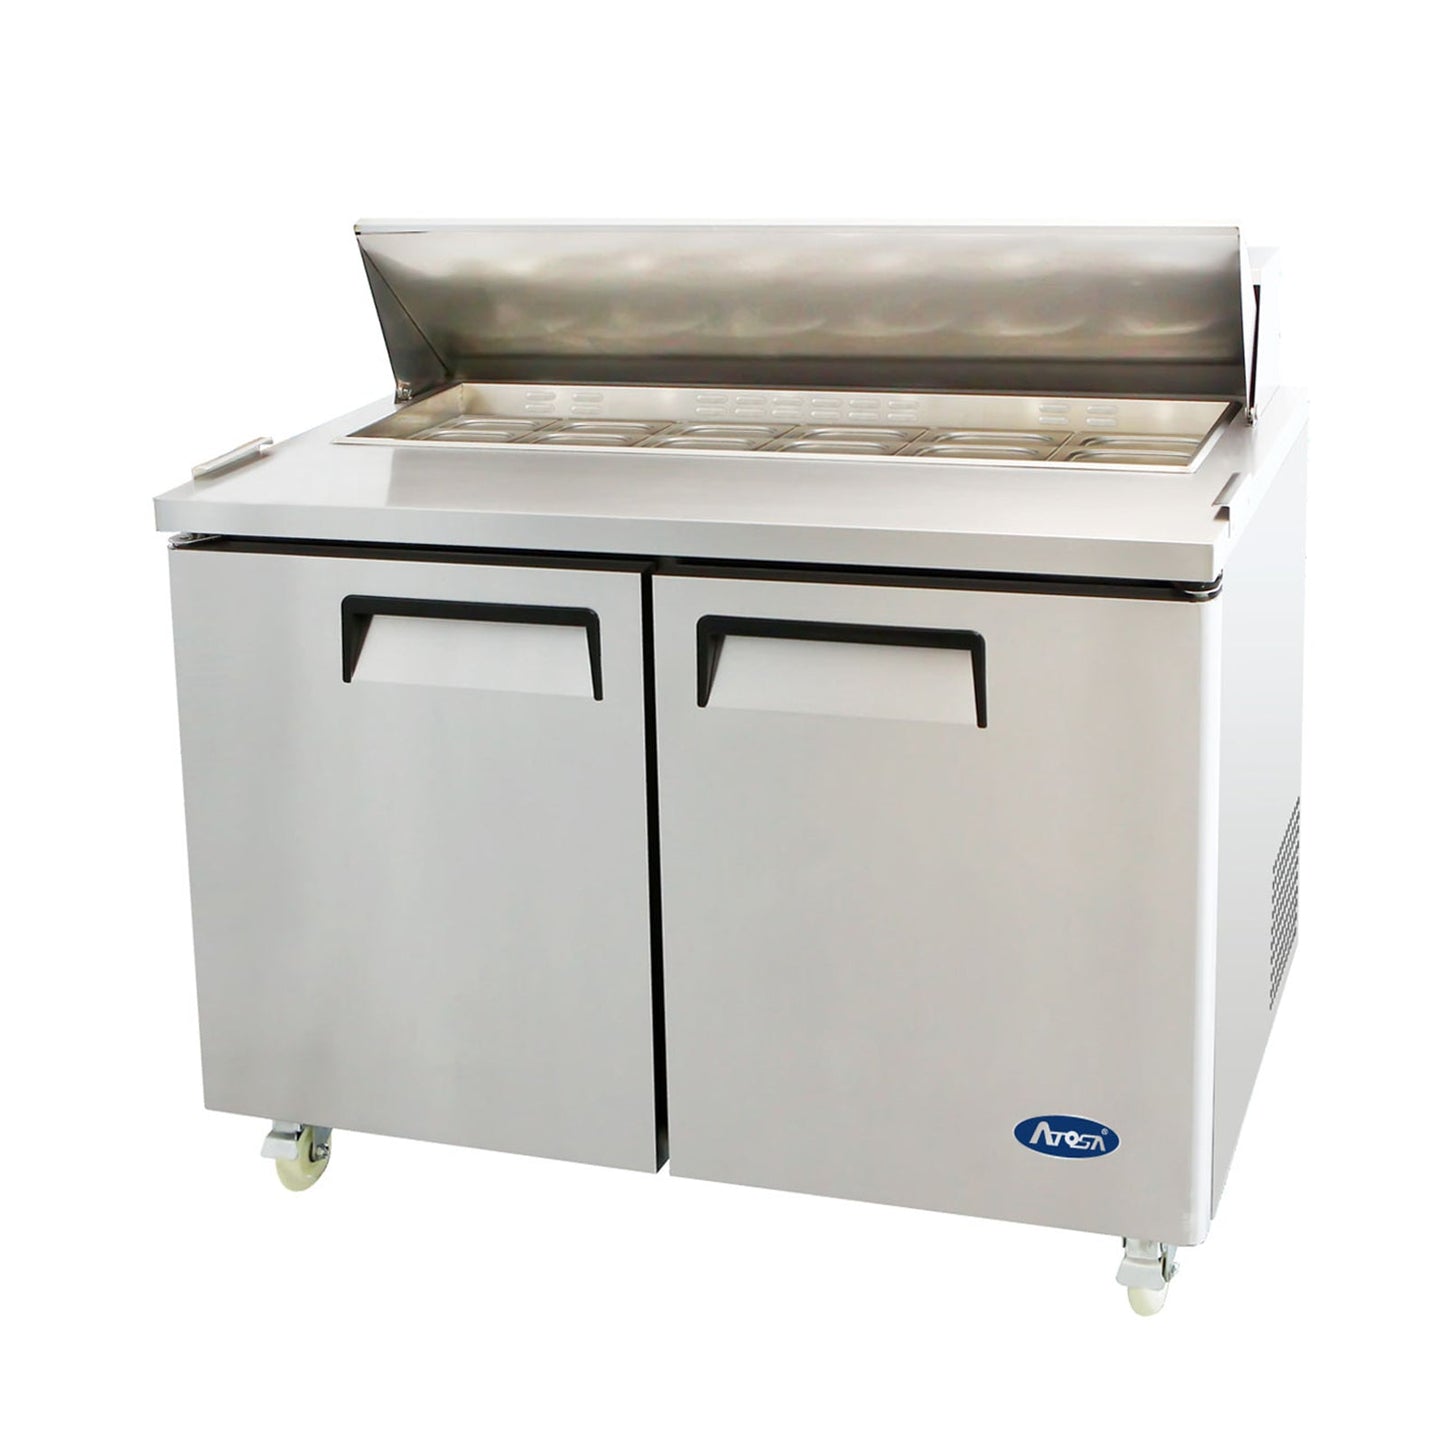 Atosa Two-section Sandwich/salad Top Refrigerator, 48-1/5"W x 30"D x 44-3/10"H, (MSF8302GR)